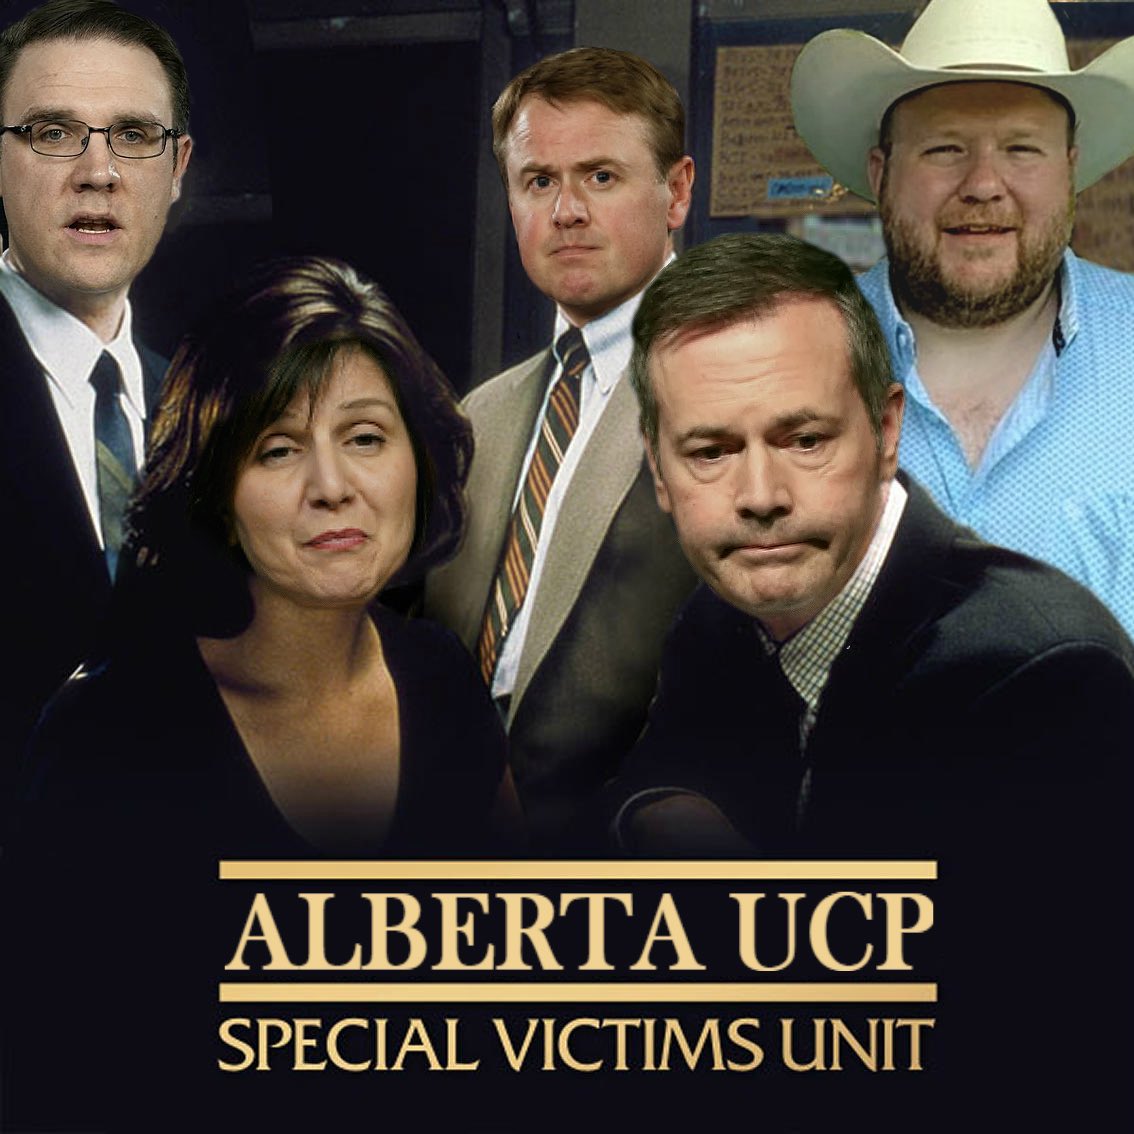 If by chance I add a duplicate  #AbLeg Premier Jason Kenney meme to this thread please have the wolfpack attack me. C'mon placematt (A.K.A.  @MattWolfAB )! Did you think I was letting you off the hook for abusing taxpayer money?